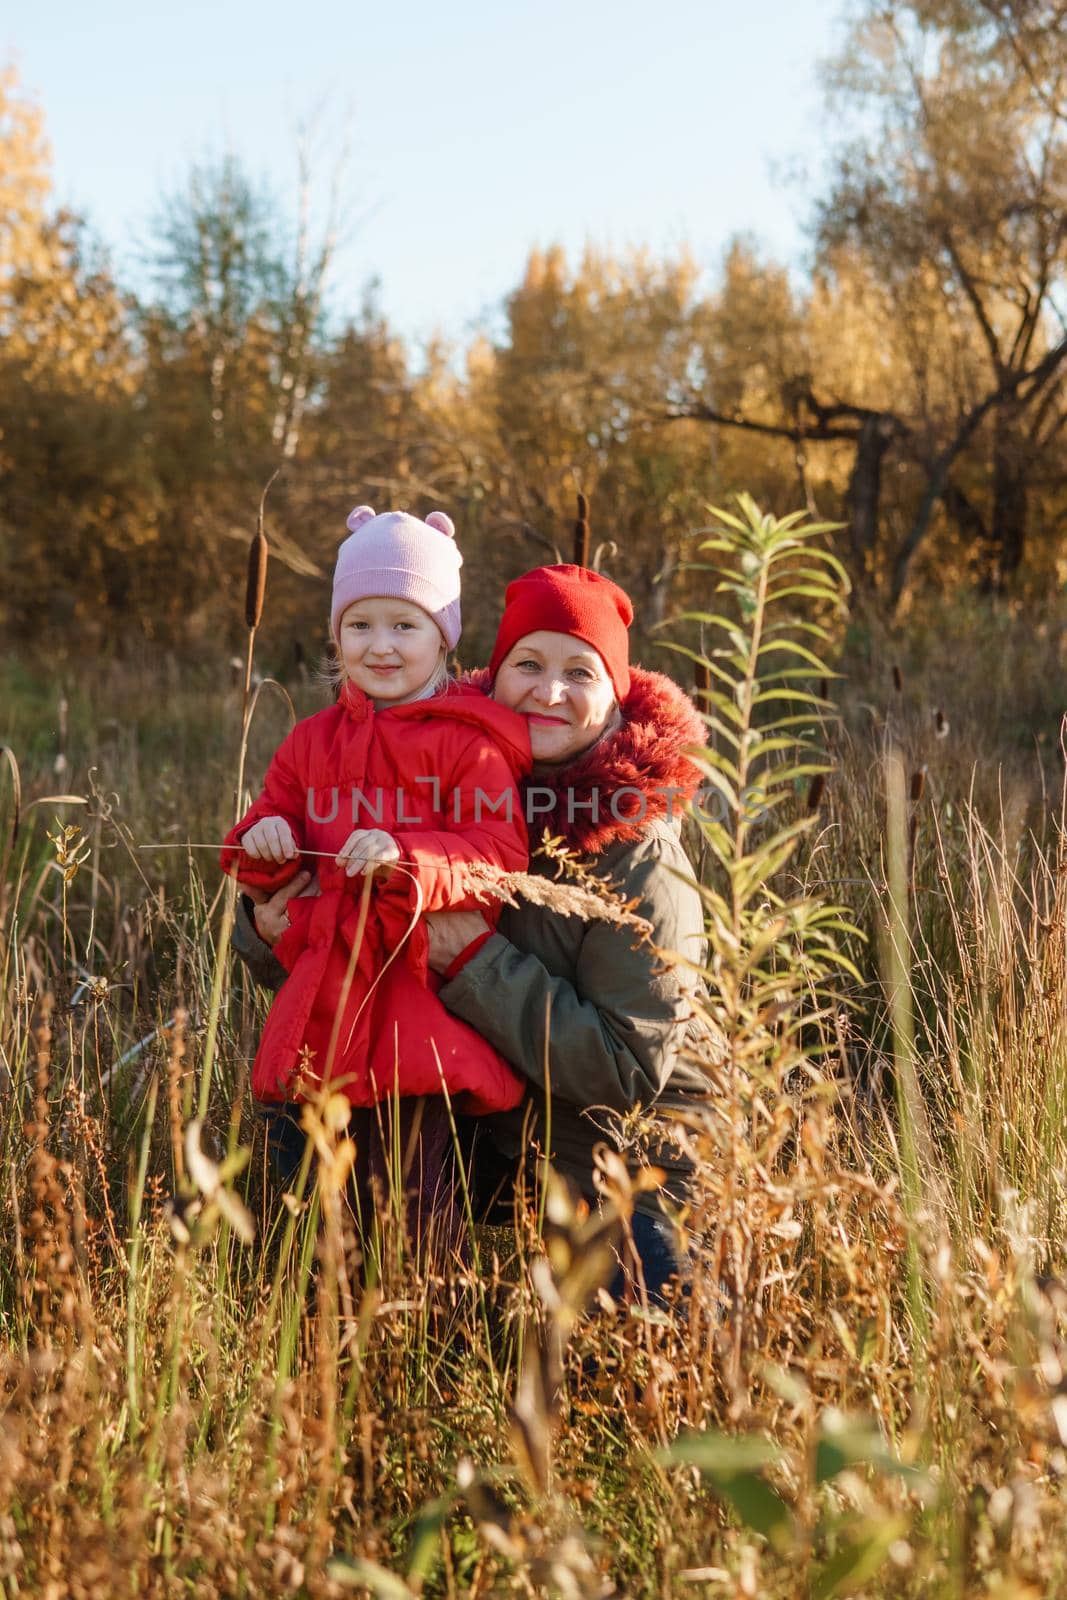 A little girl in a red coat walks in nature in an autumn grove with her grandmother. The time of the year is autumn. by Annu1tochka